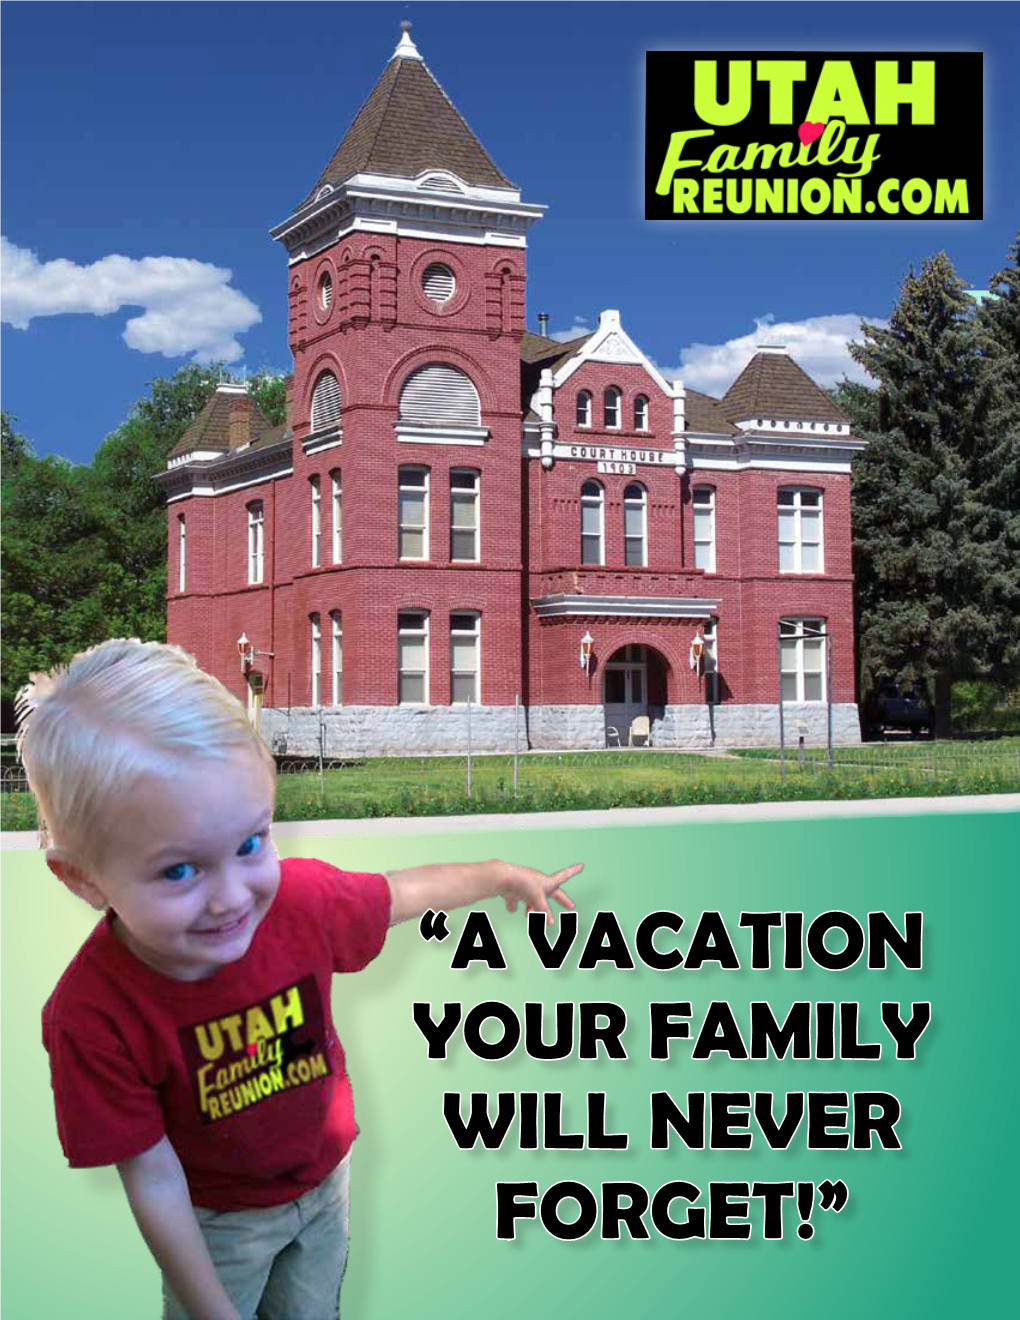 “A VACATION YOUR FAMILY WILL NEVER FORGET!” WHAT PEOPLE ARE SAYING: “Wow! What a Place! You Have Truly Done an Amazing Job Restoring Such a Wonderful Piece of History